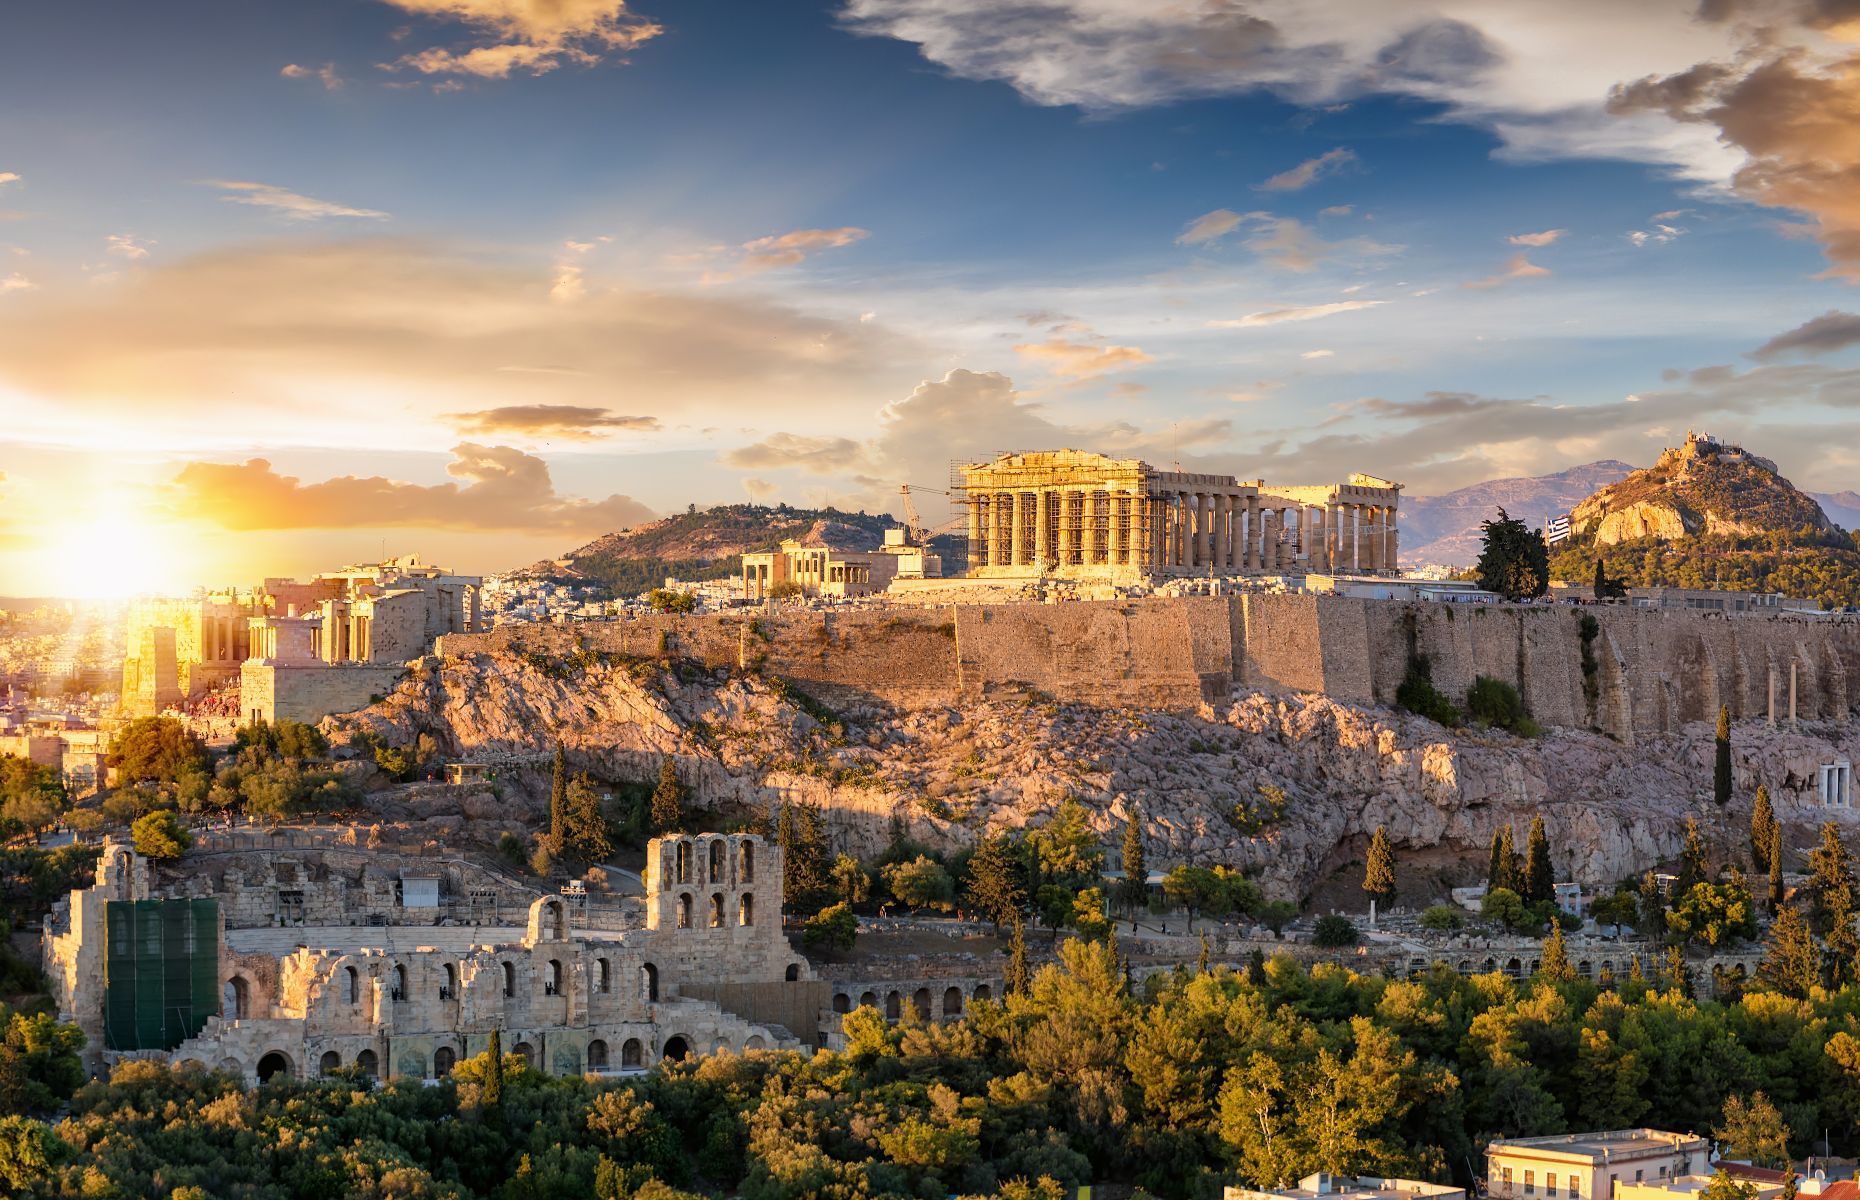 Known as the cradle of Western civilization, <a href="https://www.introducingathens.com/" rel="noreferrer noopener">Ath</a><a href="https://www.introducingathens.com/" rel="noreferrer noopener">e</a><a href="https://www.introducingathens.com/" rel="noreferrer noopener">ns</a> plunges visitors into the best of ancient Greece while still offering lively city life. Make sure your itinerary includes a visit to <a href="https://www.acropolis-tickets.com/acropolis-of-athens/" rel="noreferrer noopener">the Acropolis</a>, Parthenon, Agora, and Temple of Olympian Zeus. Then, for a dive into authentic Greek culture, take a turn through the <a href="https://www.athensguide.com/plaka.html" rel="noreferrer noopener">Plaka</a> before enjoying some moussaka and a glass of ouzo on its picturesque terraces.